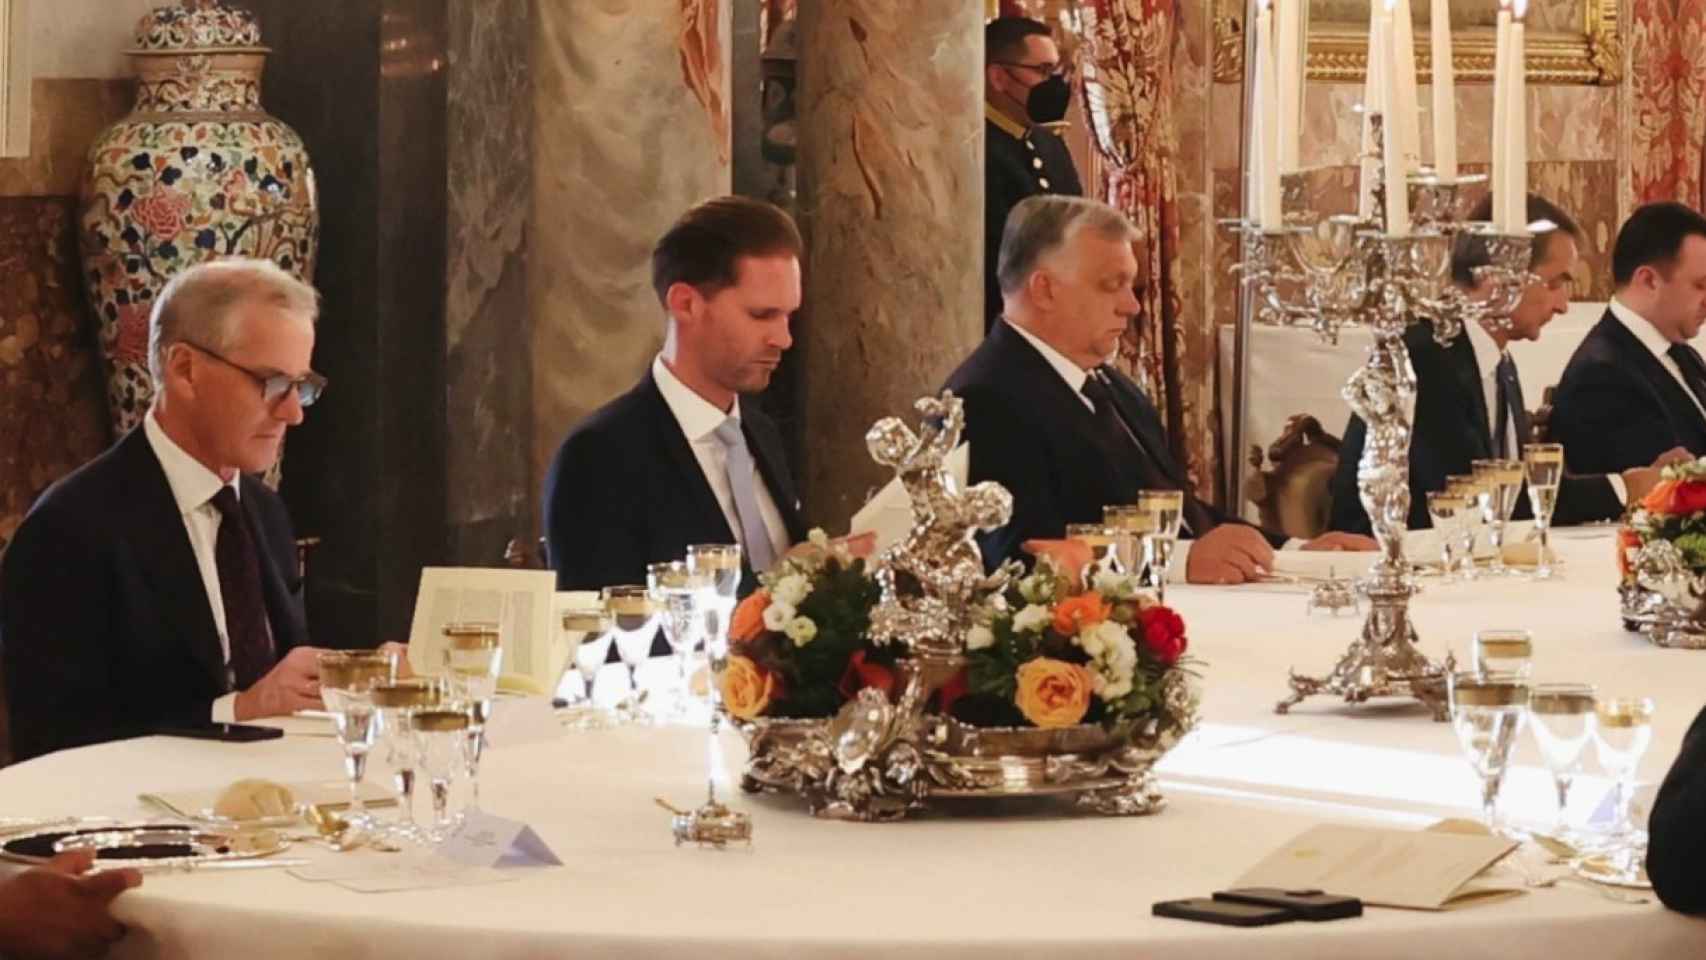 The protocol unites the homophobic Orbán at the palace dinner with the husband of the president of Luxembourg